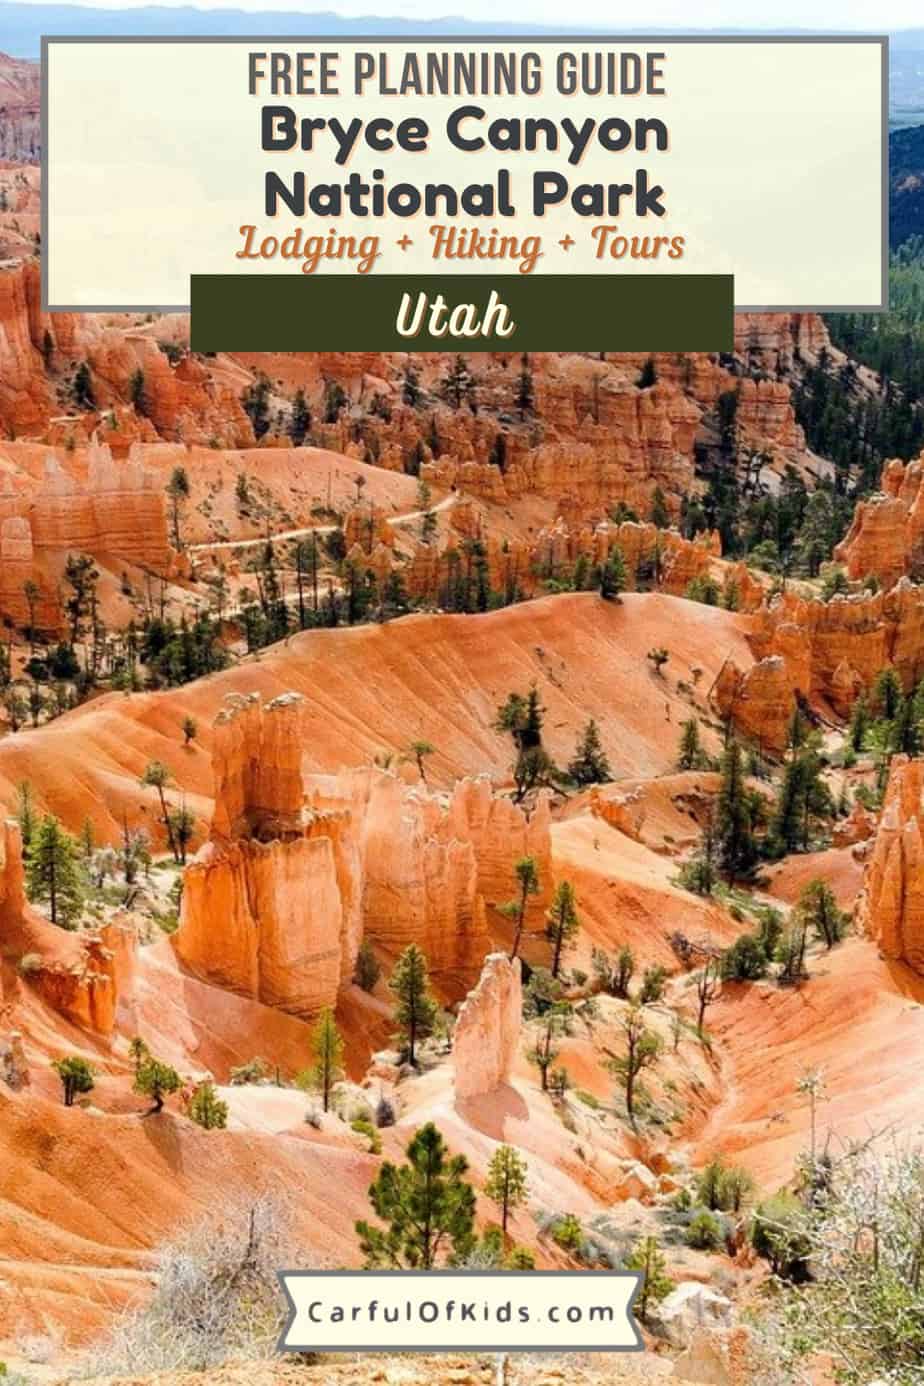 Part of Utah's Mighty Five, Bryce Canyon National Park is just down the highway from Zion National Park. With its pink spires, add it to your Utah Road Trip. Use this National Park guide to help plan your next trip. Find out Where to stay, Where to hike and other activities like horseback riding. Where to go in Utah | The National Parks of Utah | Cabins in Bryce Canyon | What do to in Bryce Canyon #NationalParks #Utah 